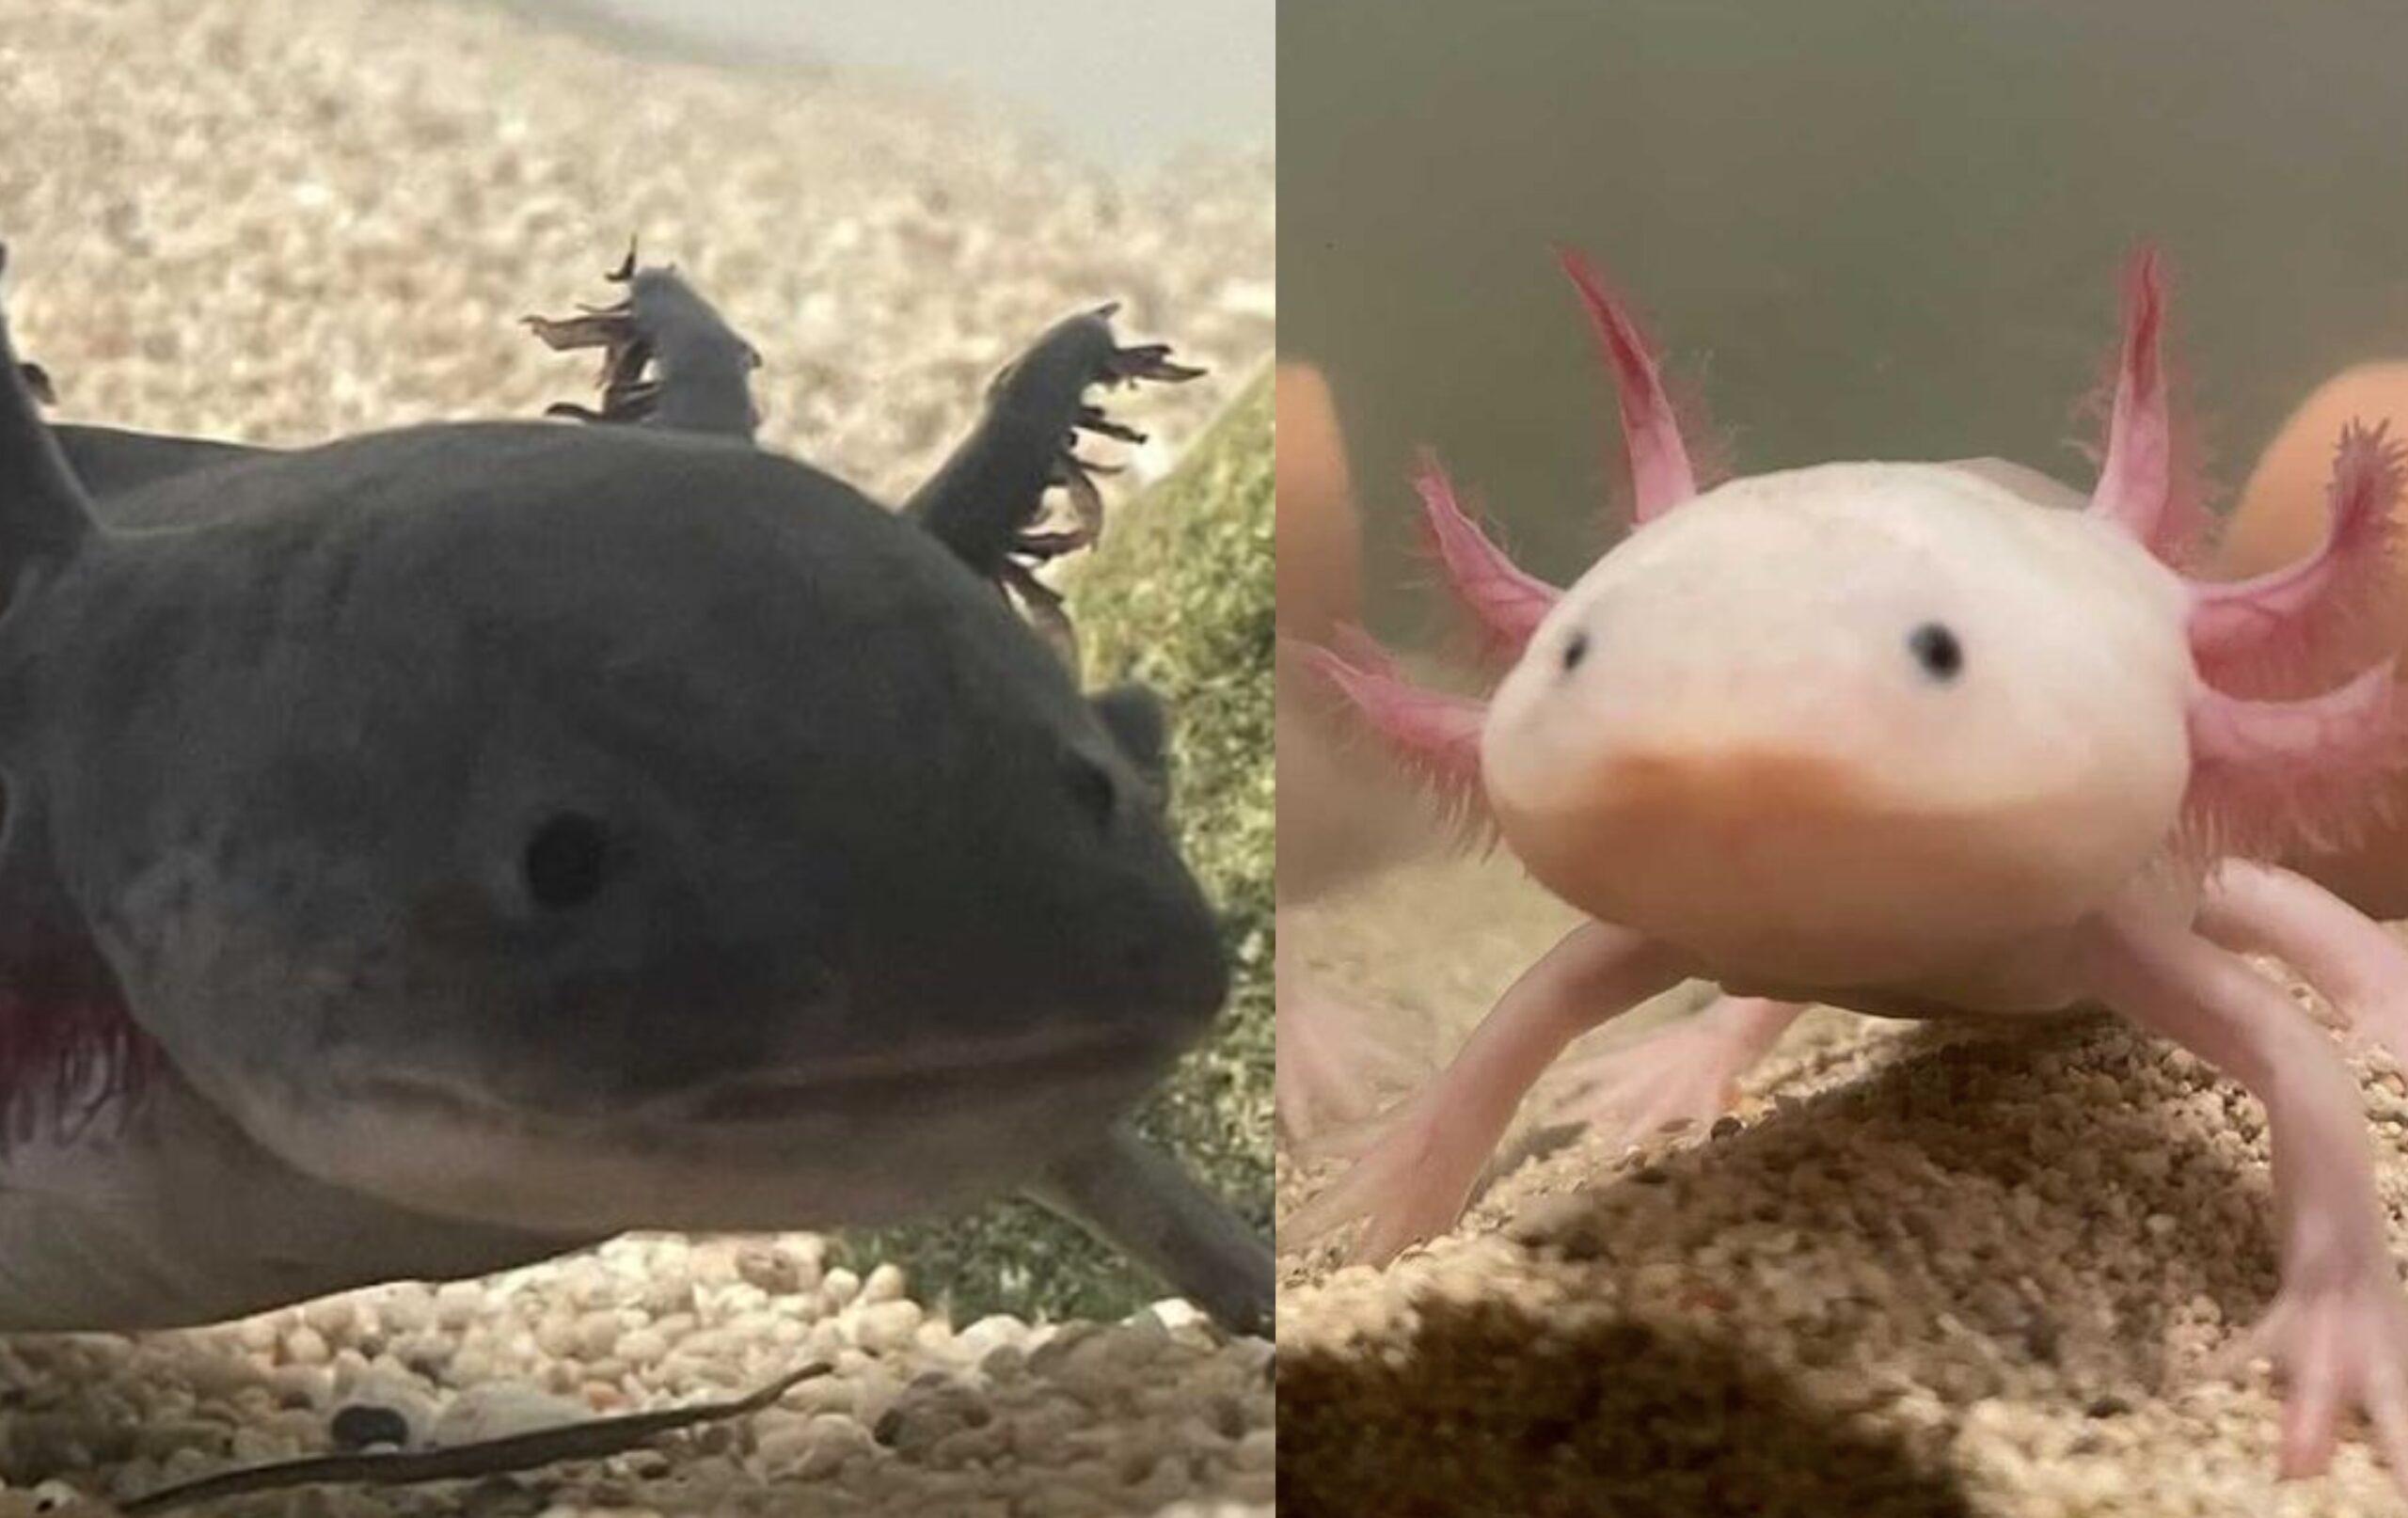 Peculiar pets: What are axolotls, and how do you take care of them?